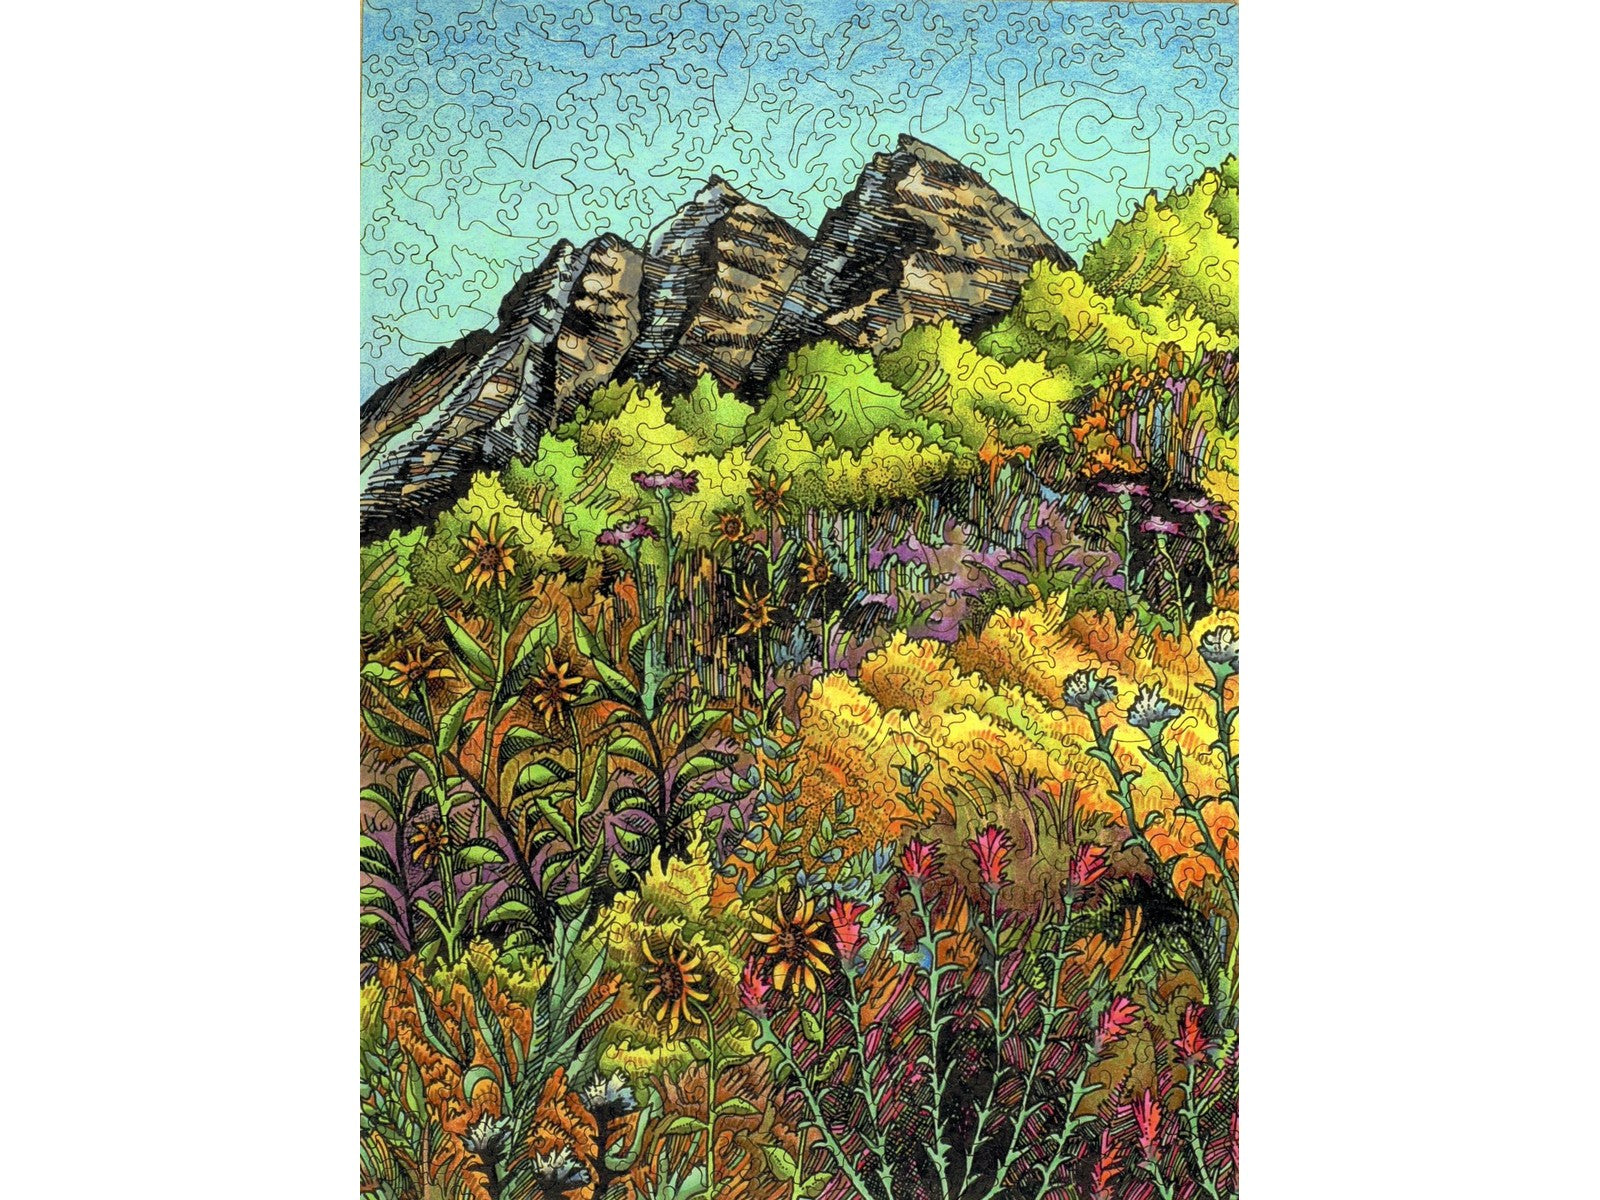 The front of the puzzle, Maroon Bells, which shows a illustrated landscape scene of Colorado mountains and wildflowers.